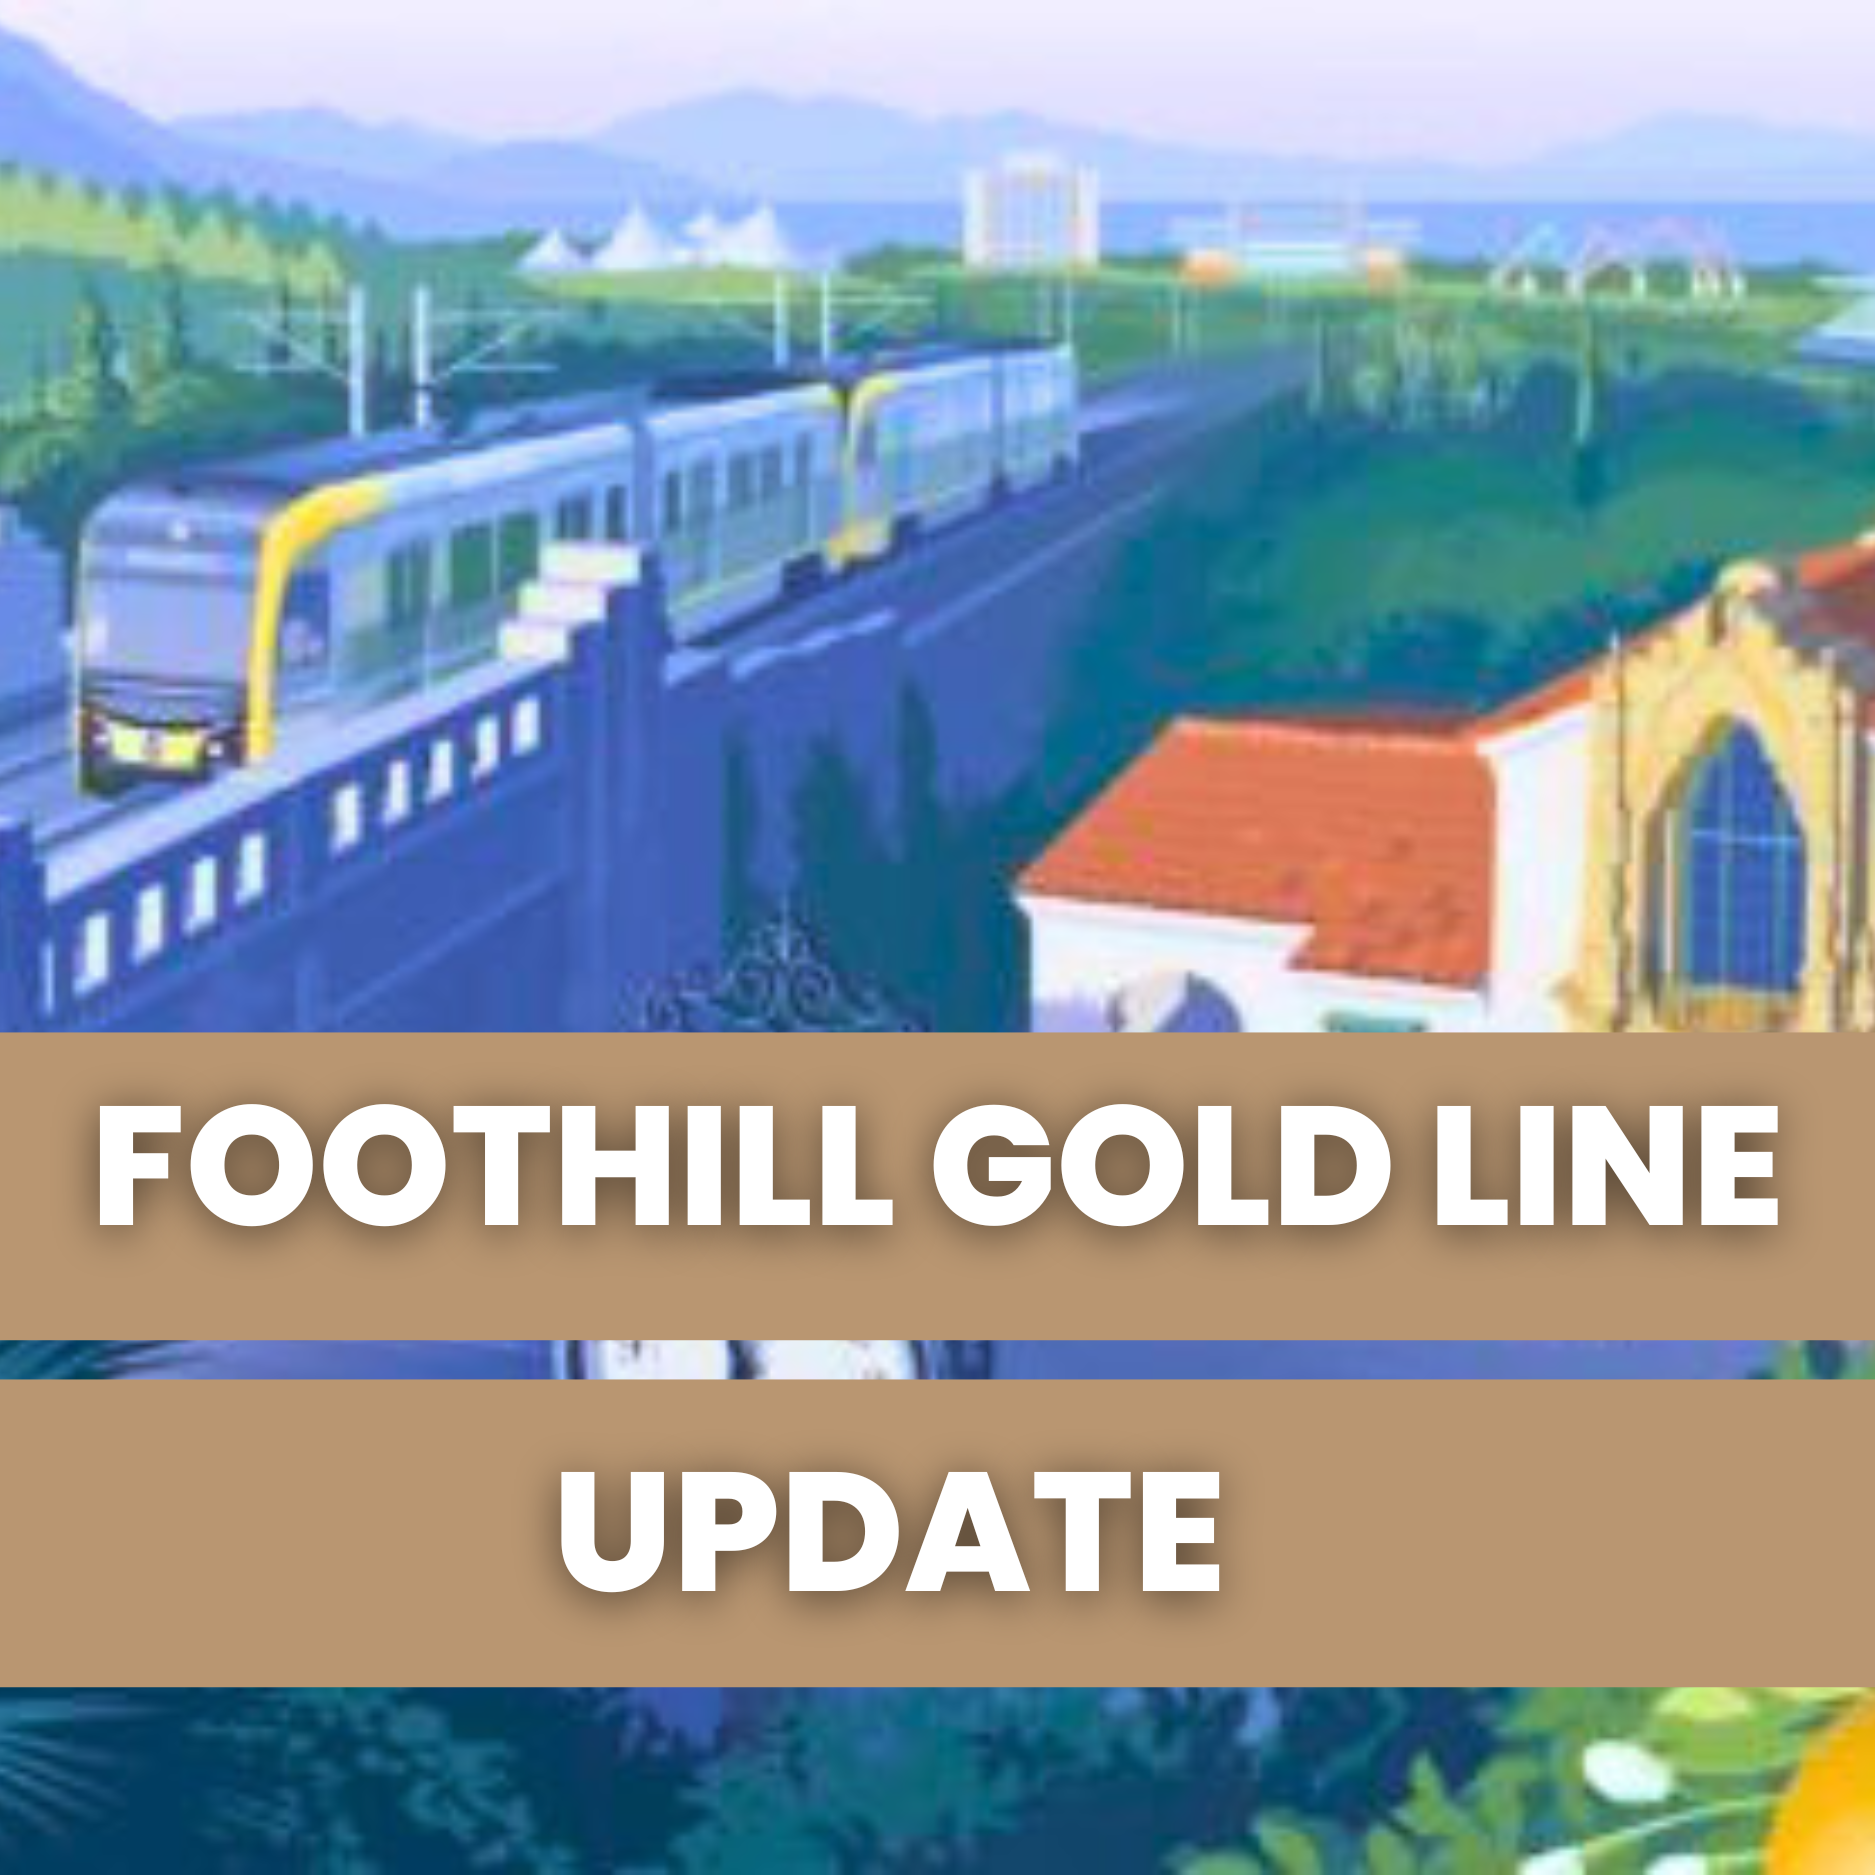 City of Pomona Announces Major Construction and Testing Activities for Foothill Gold Line Project